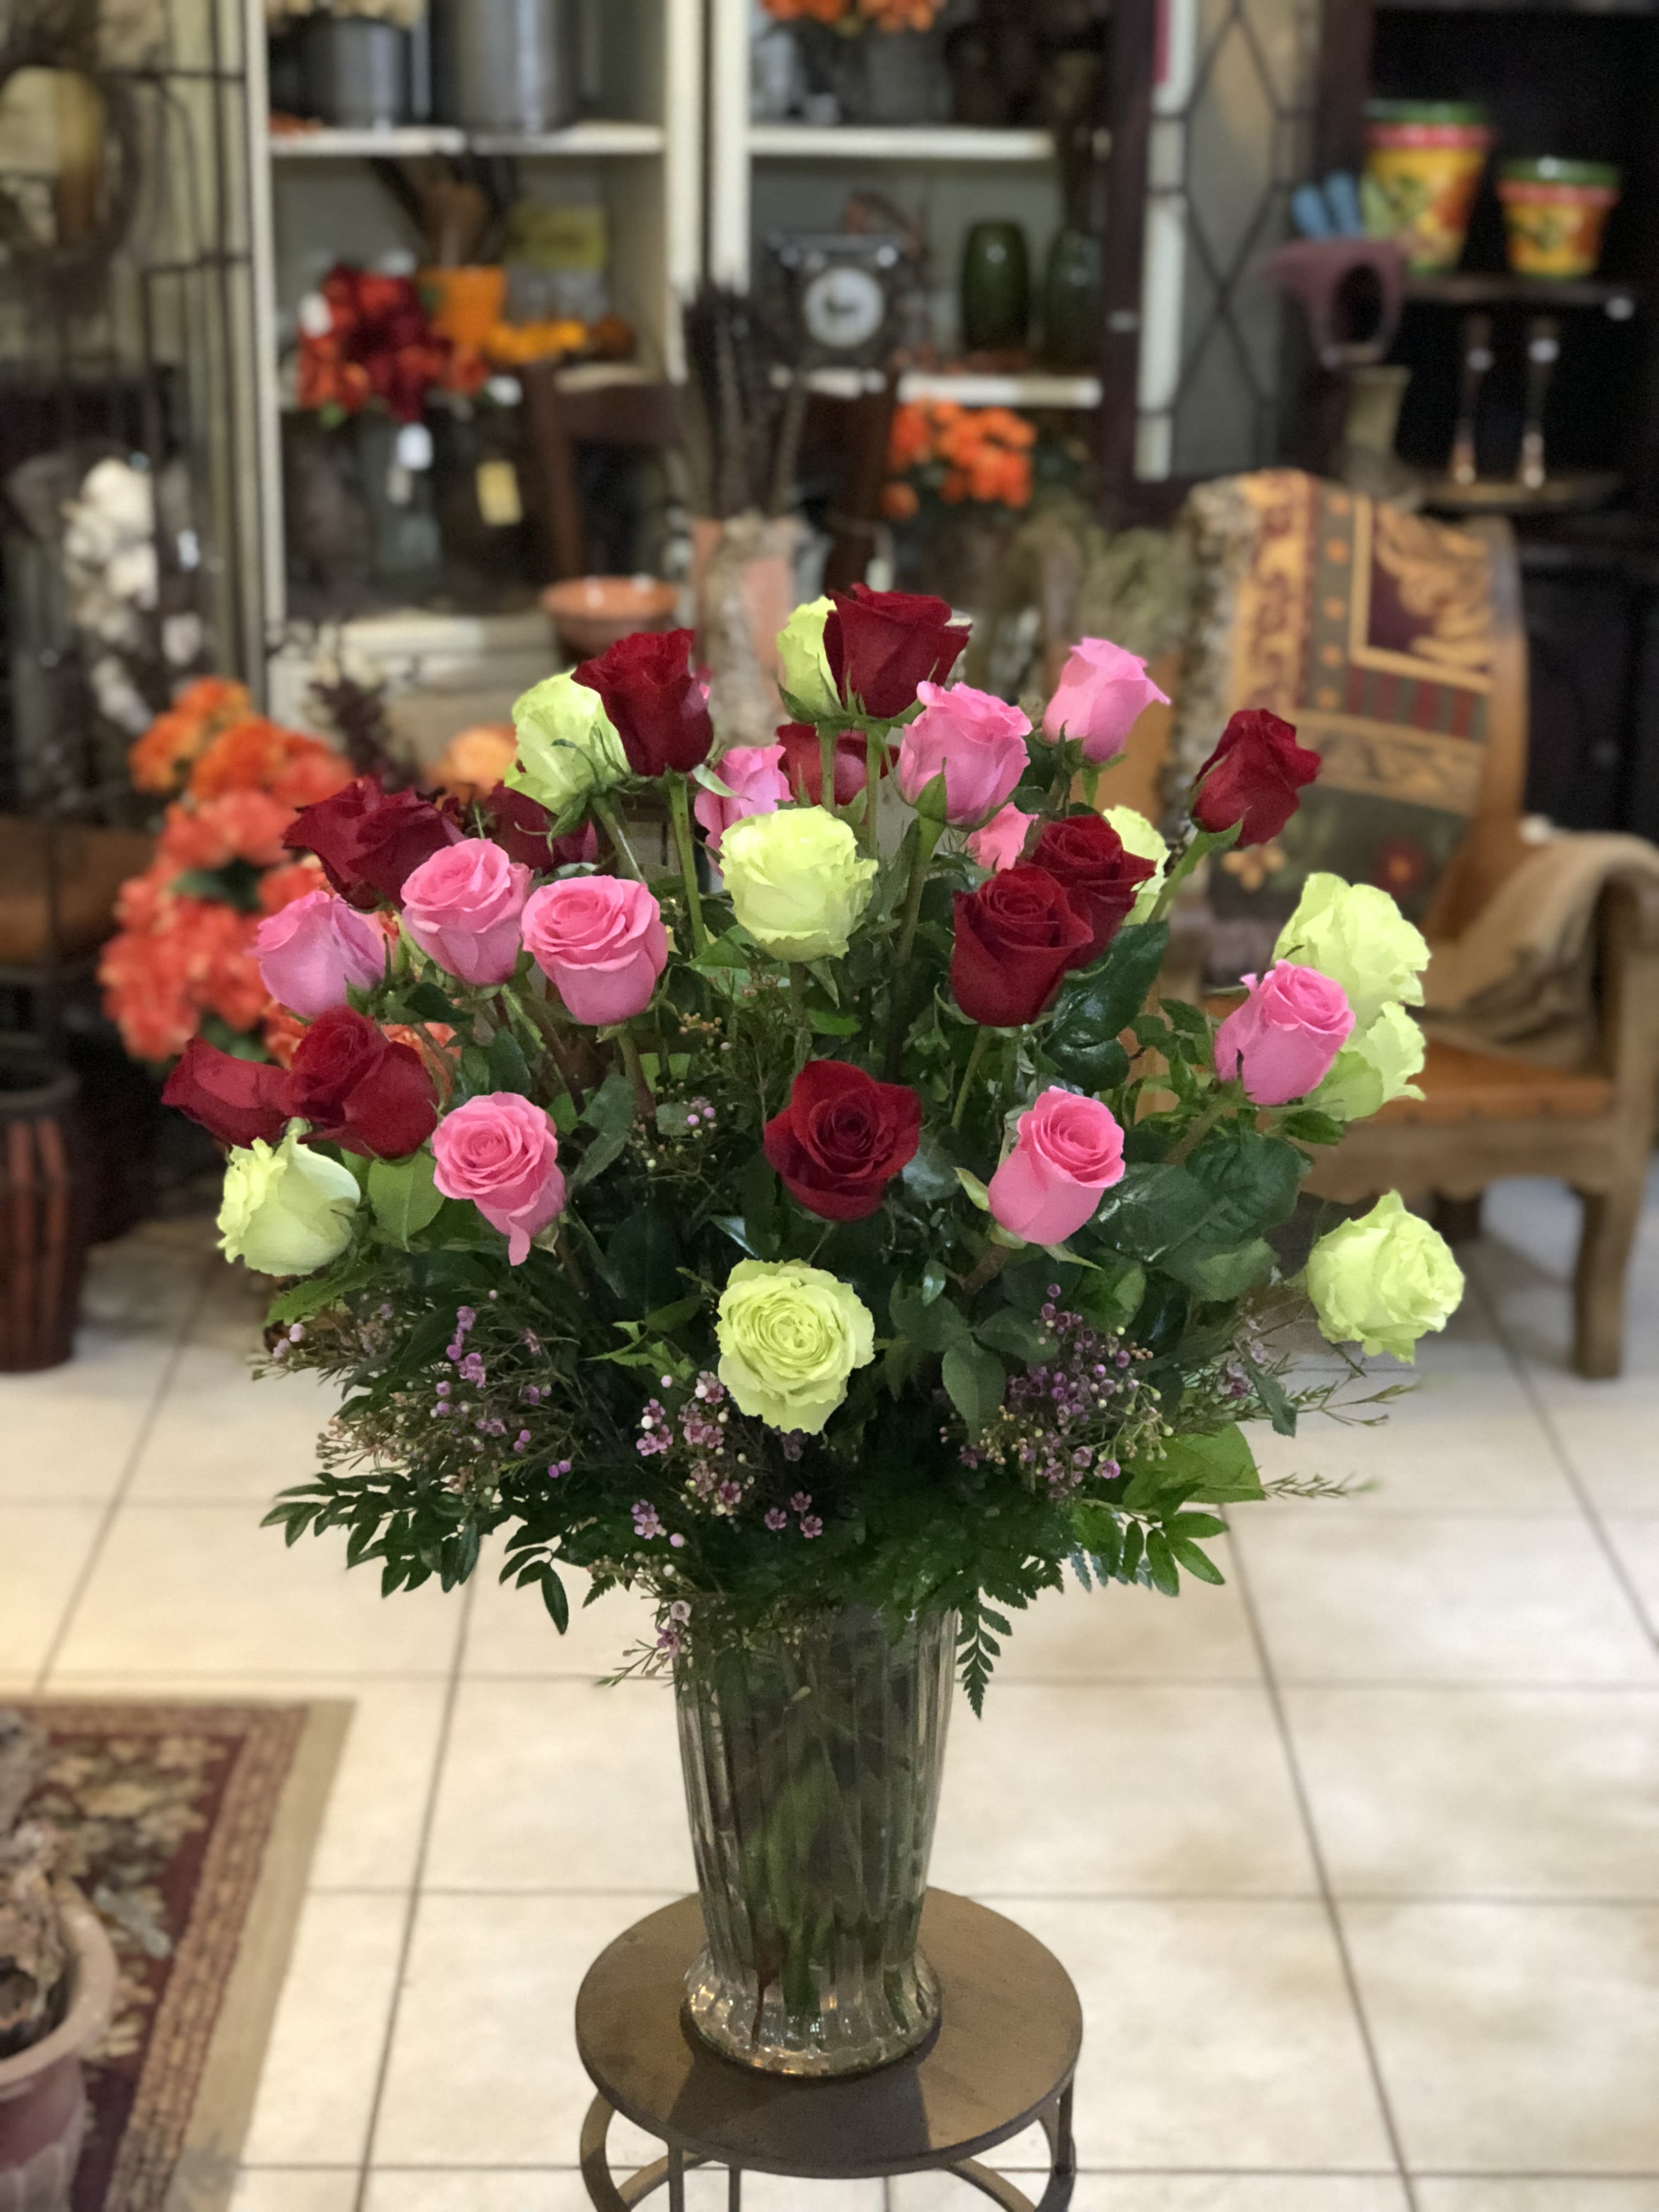 Symphony of Roses - The gorgeous arrangement of 3 dozen premium roses in 3 beautiful colors, is guaranteed to put a smile on any face!  Colors will be based on availability.